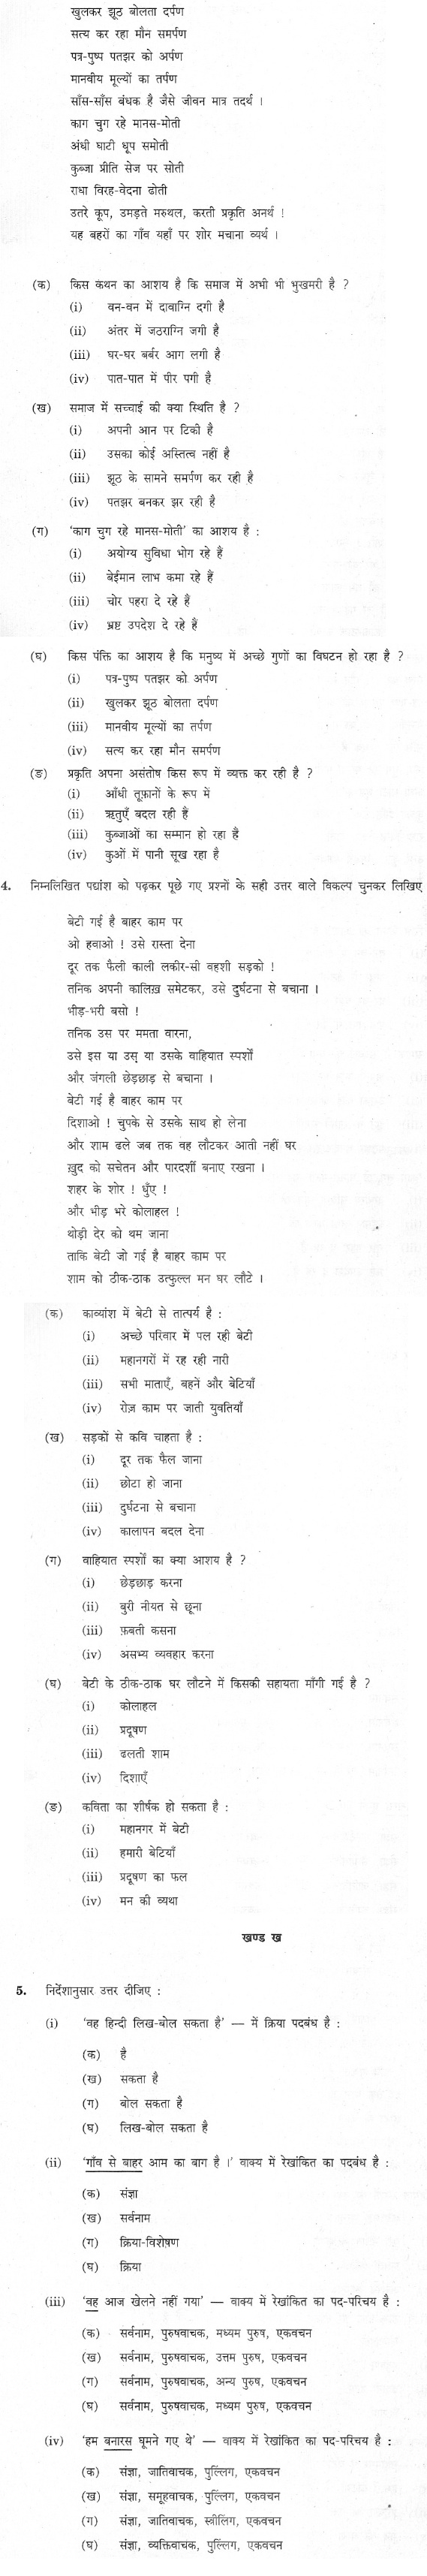 CBSE Class X Previous Year Question Papers 2012  Hindi(Course B)